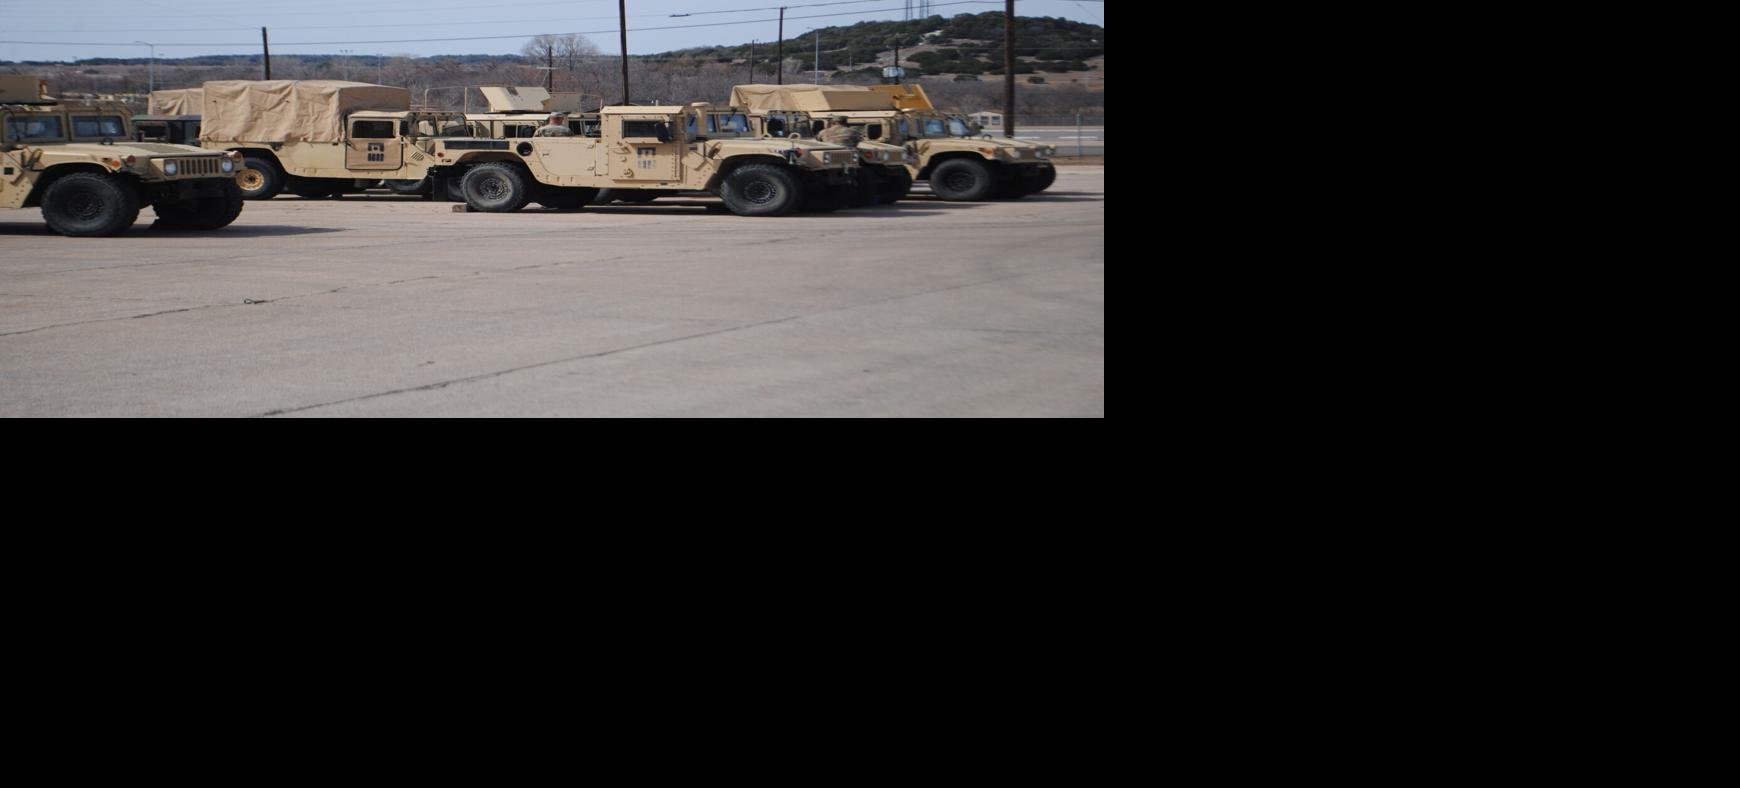 new military vehicle to replace humvee